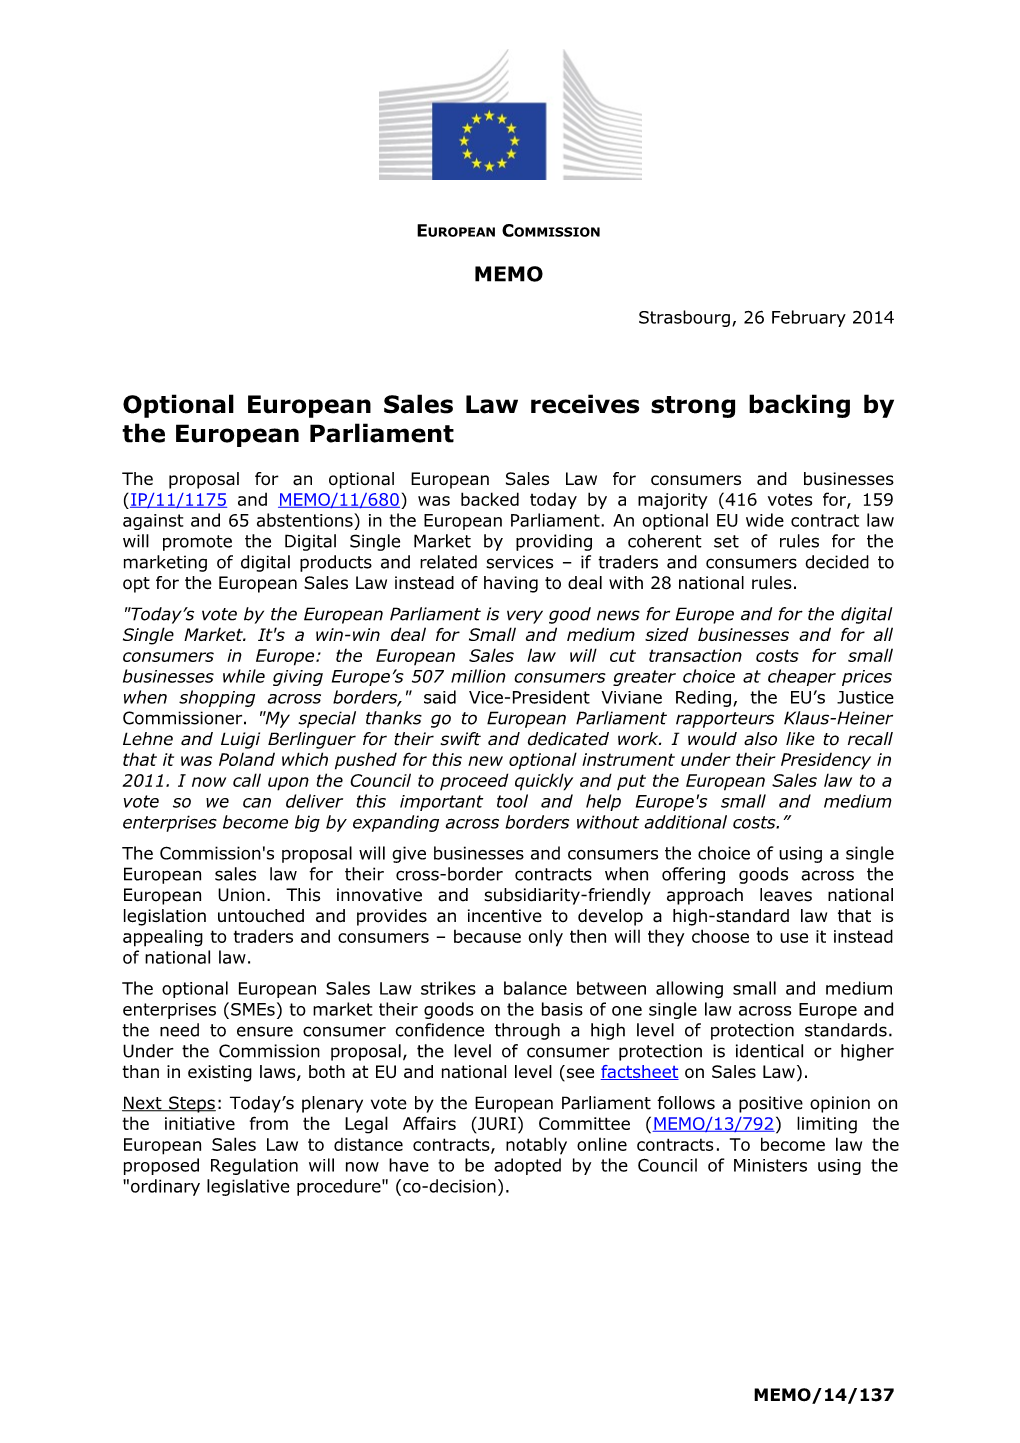 Optional European Sales Law Receives Strong Backing by the European Parliament